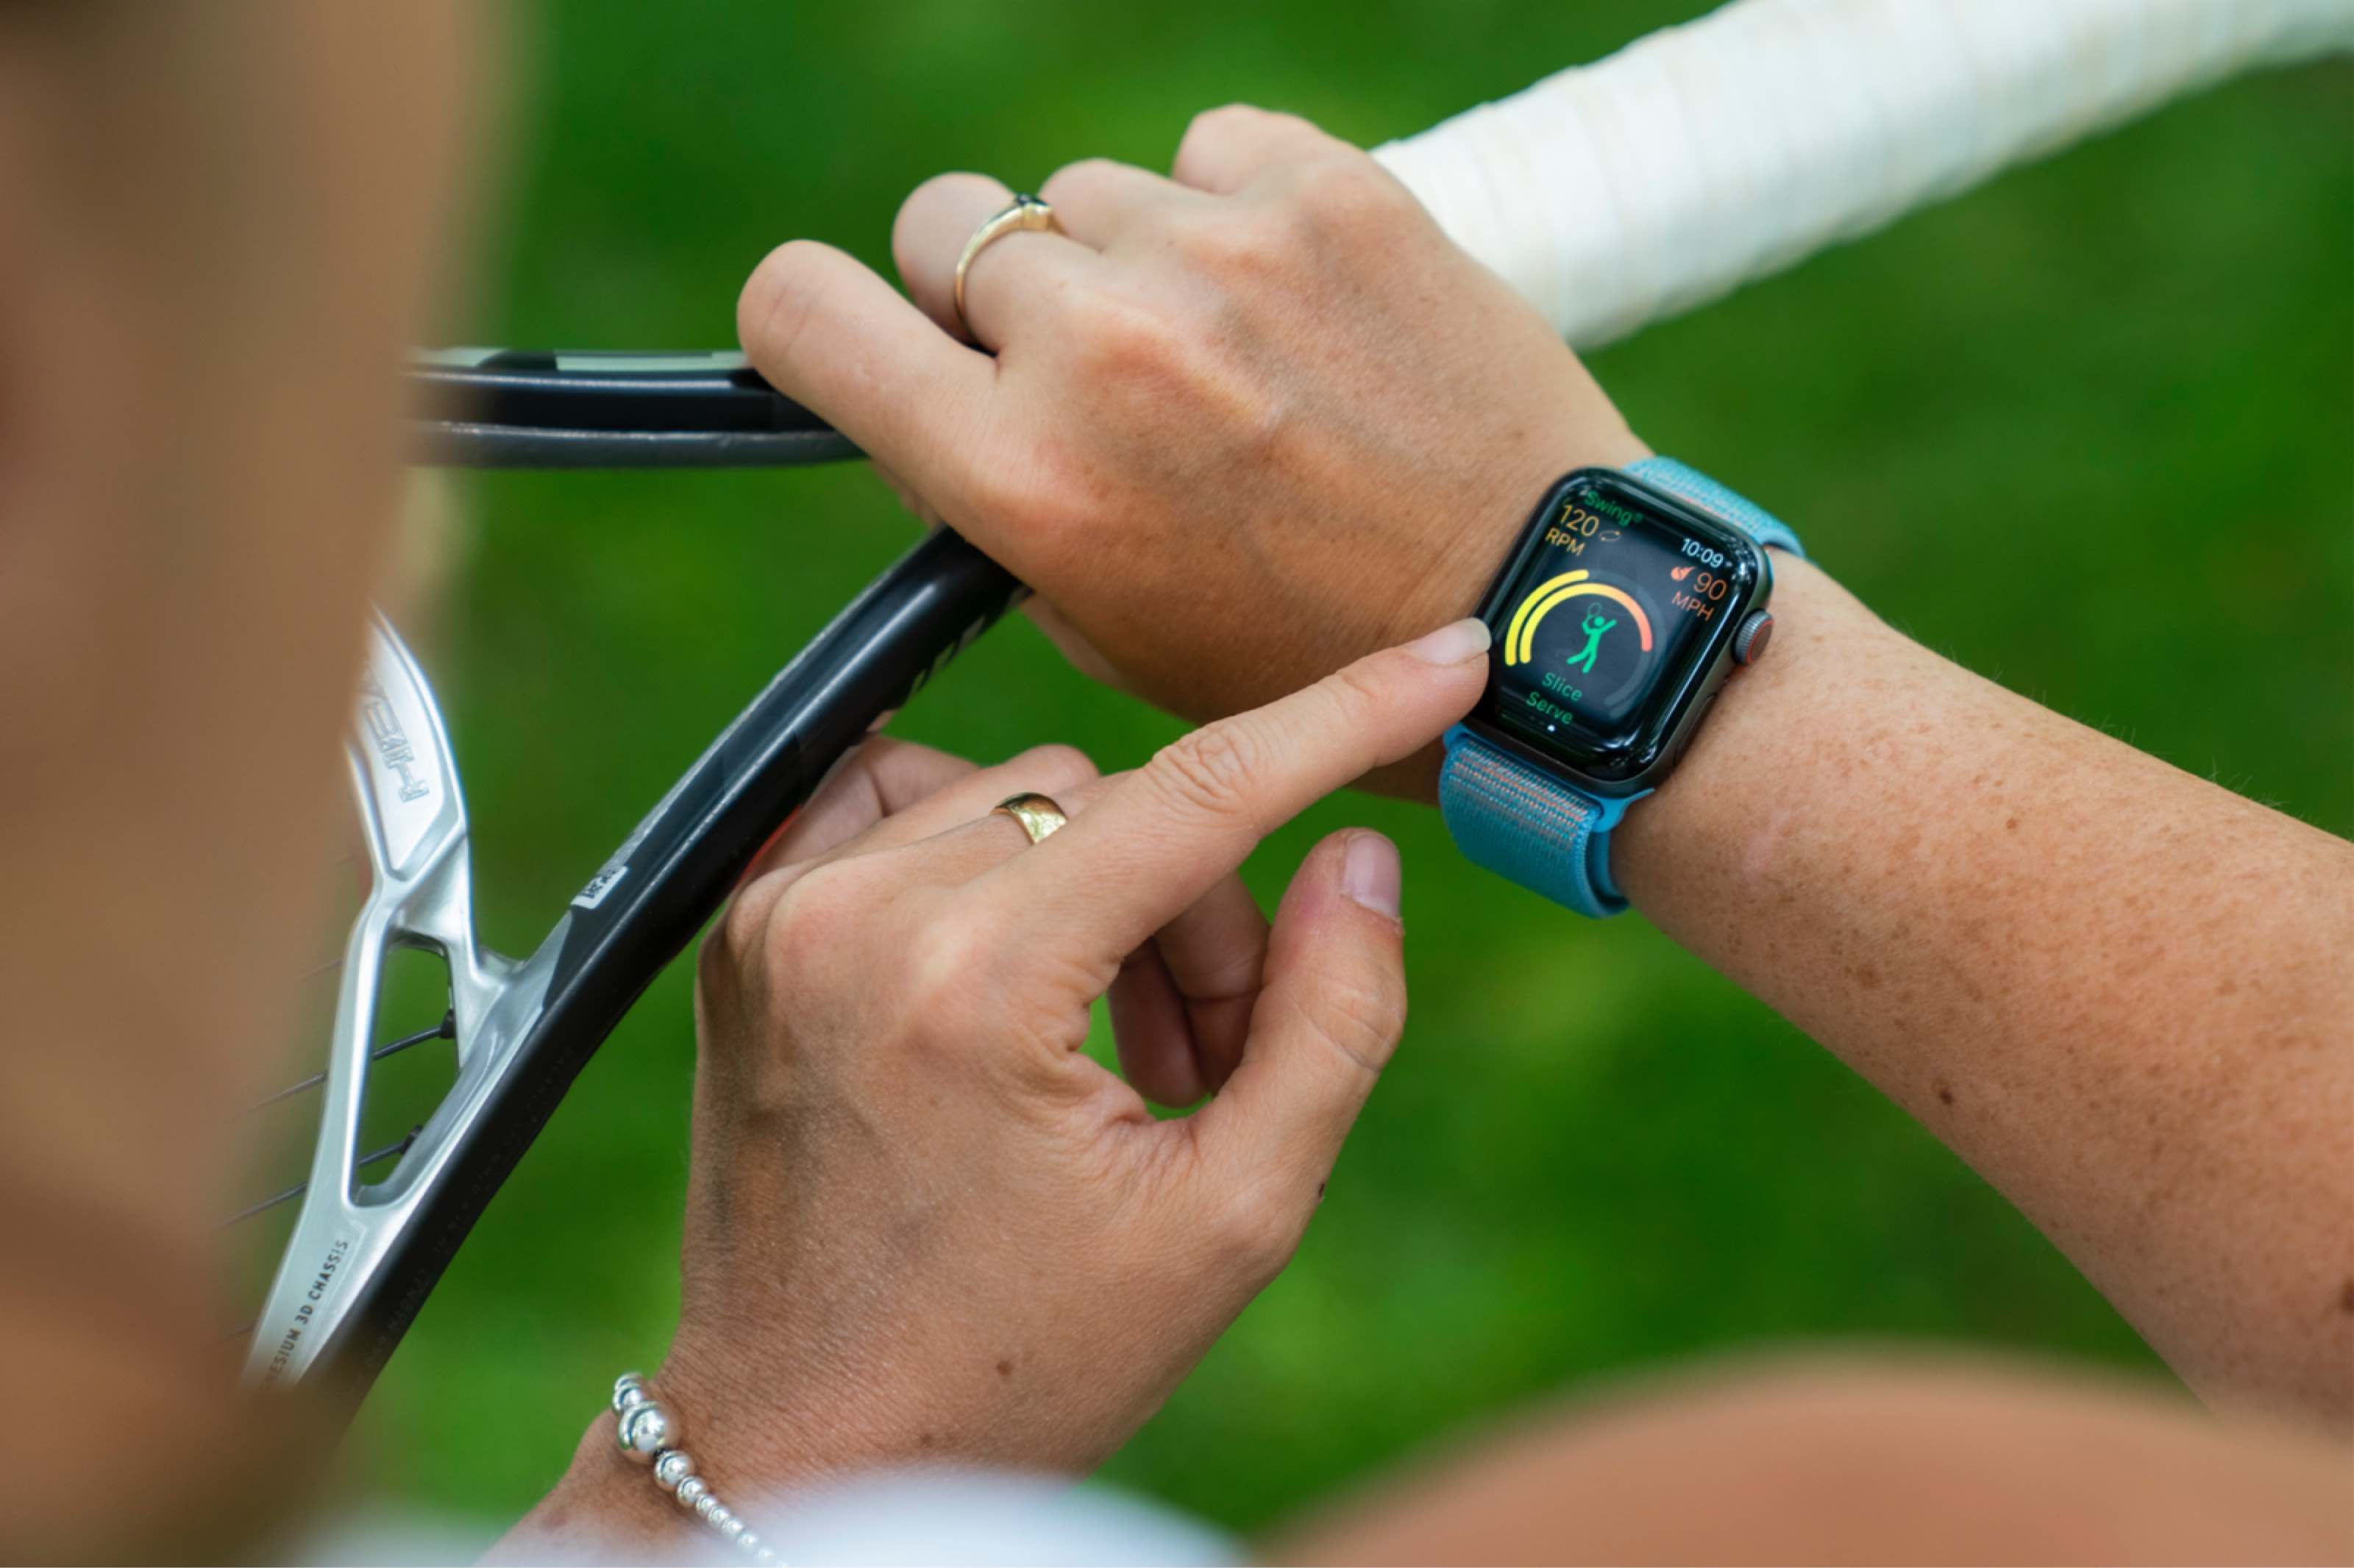 Swing The tennis Apple Watch app that will track your shots around court image 1